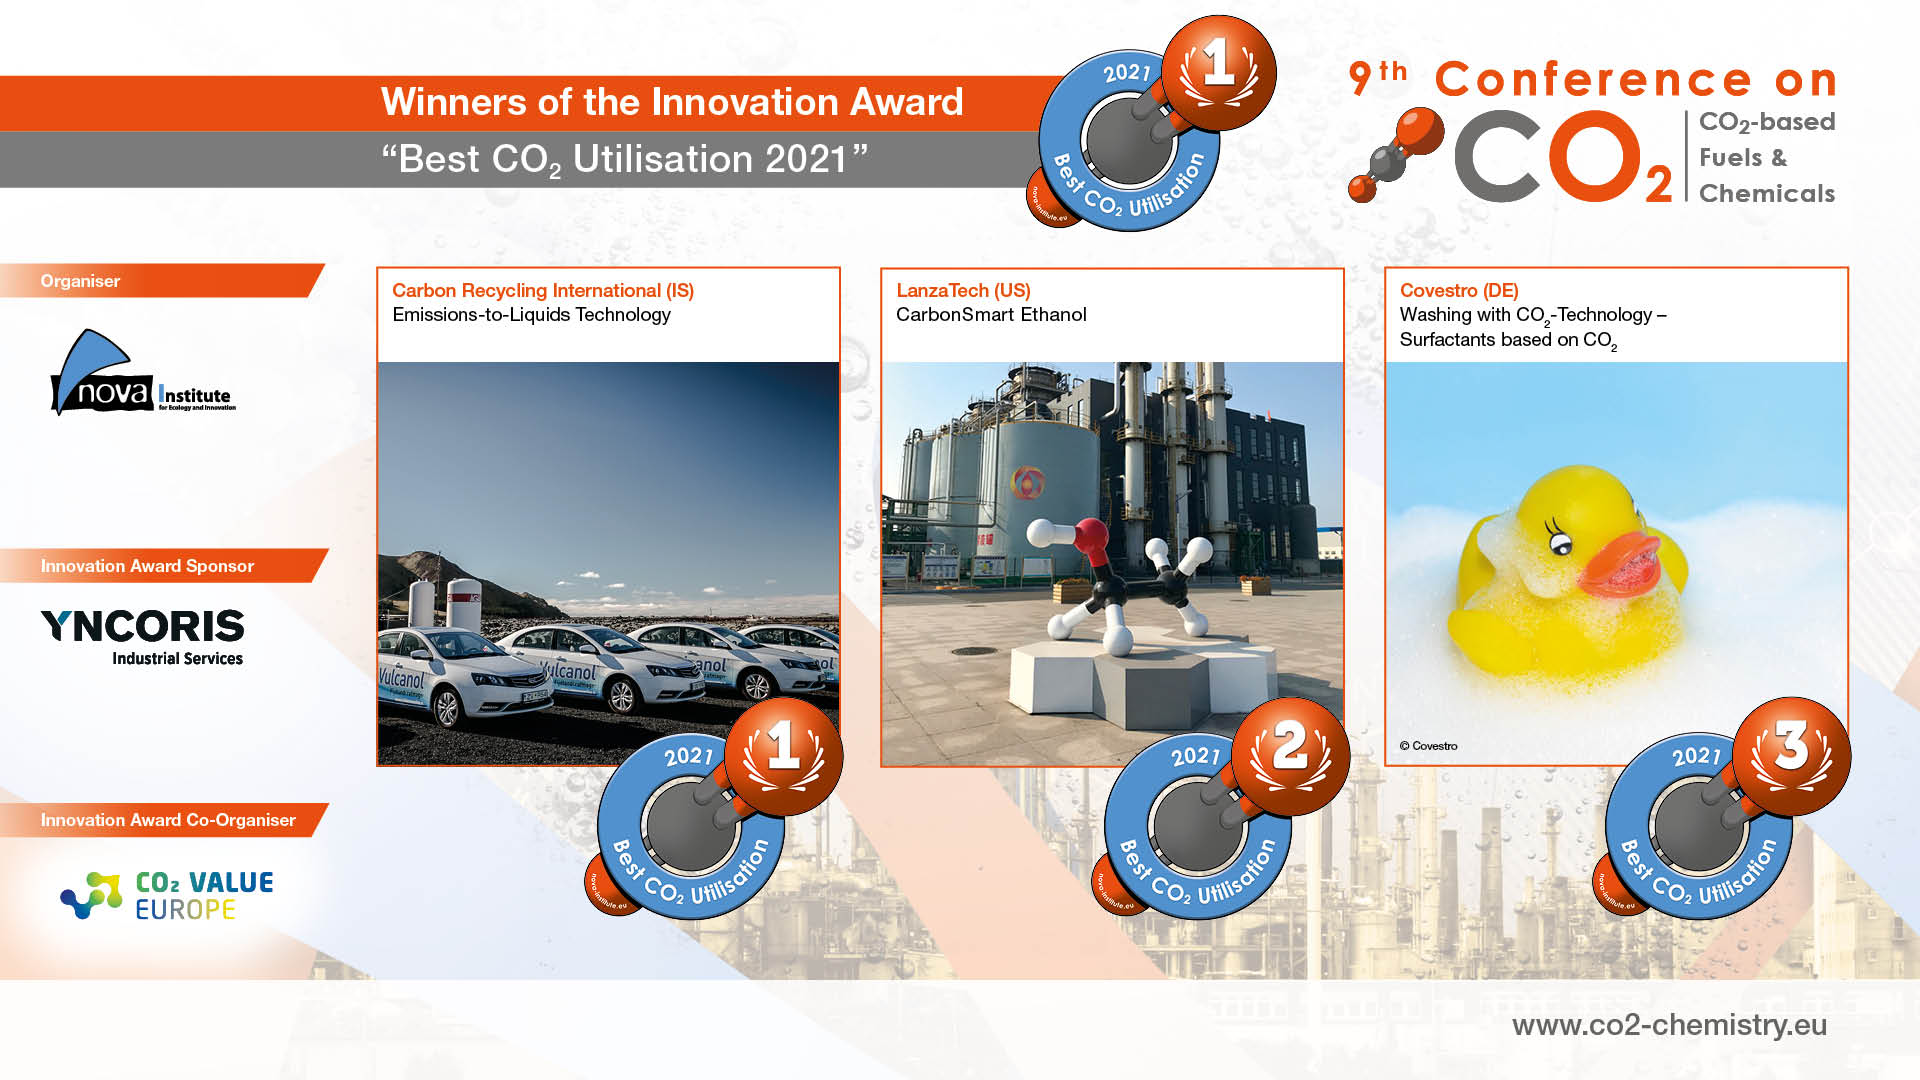 Picture: Winners of the innovation award "Best CO2 Utilisation 2021"